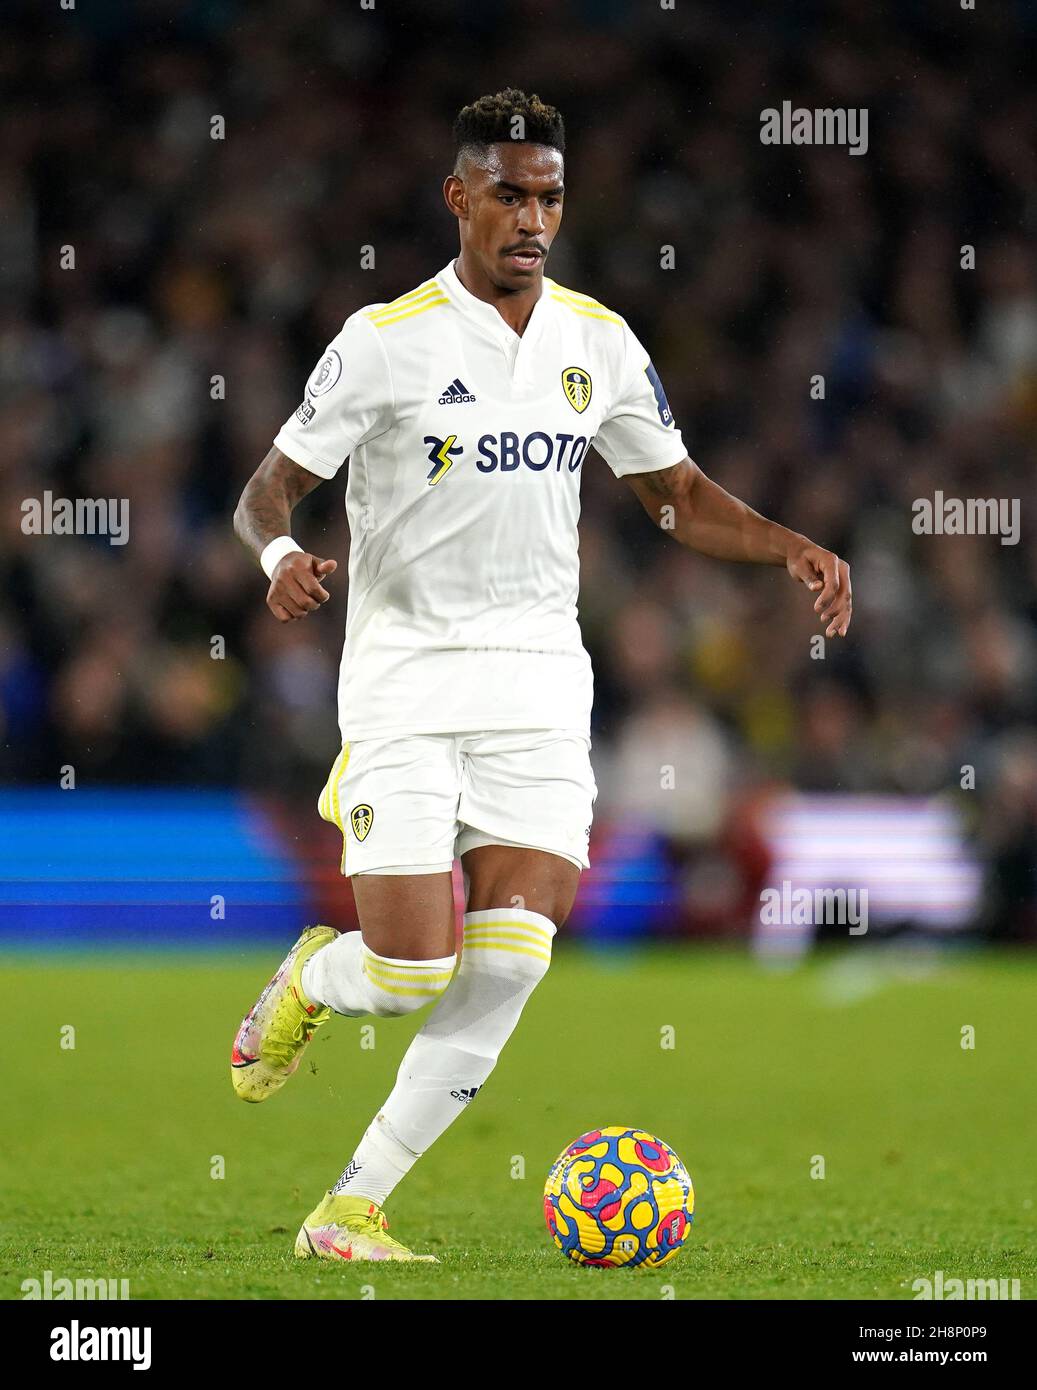 Leeds United's Junior Firpo during the Premier League match at Elland Road, Leeds. Picture date: Tuesday November 30, 2021. Stock Photo